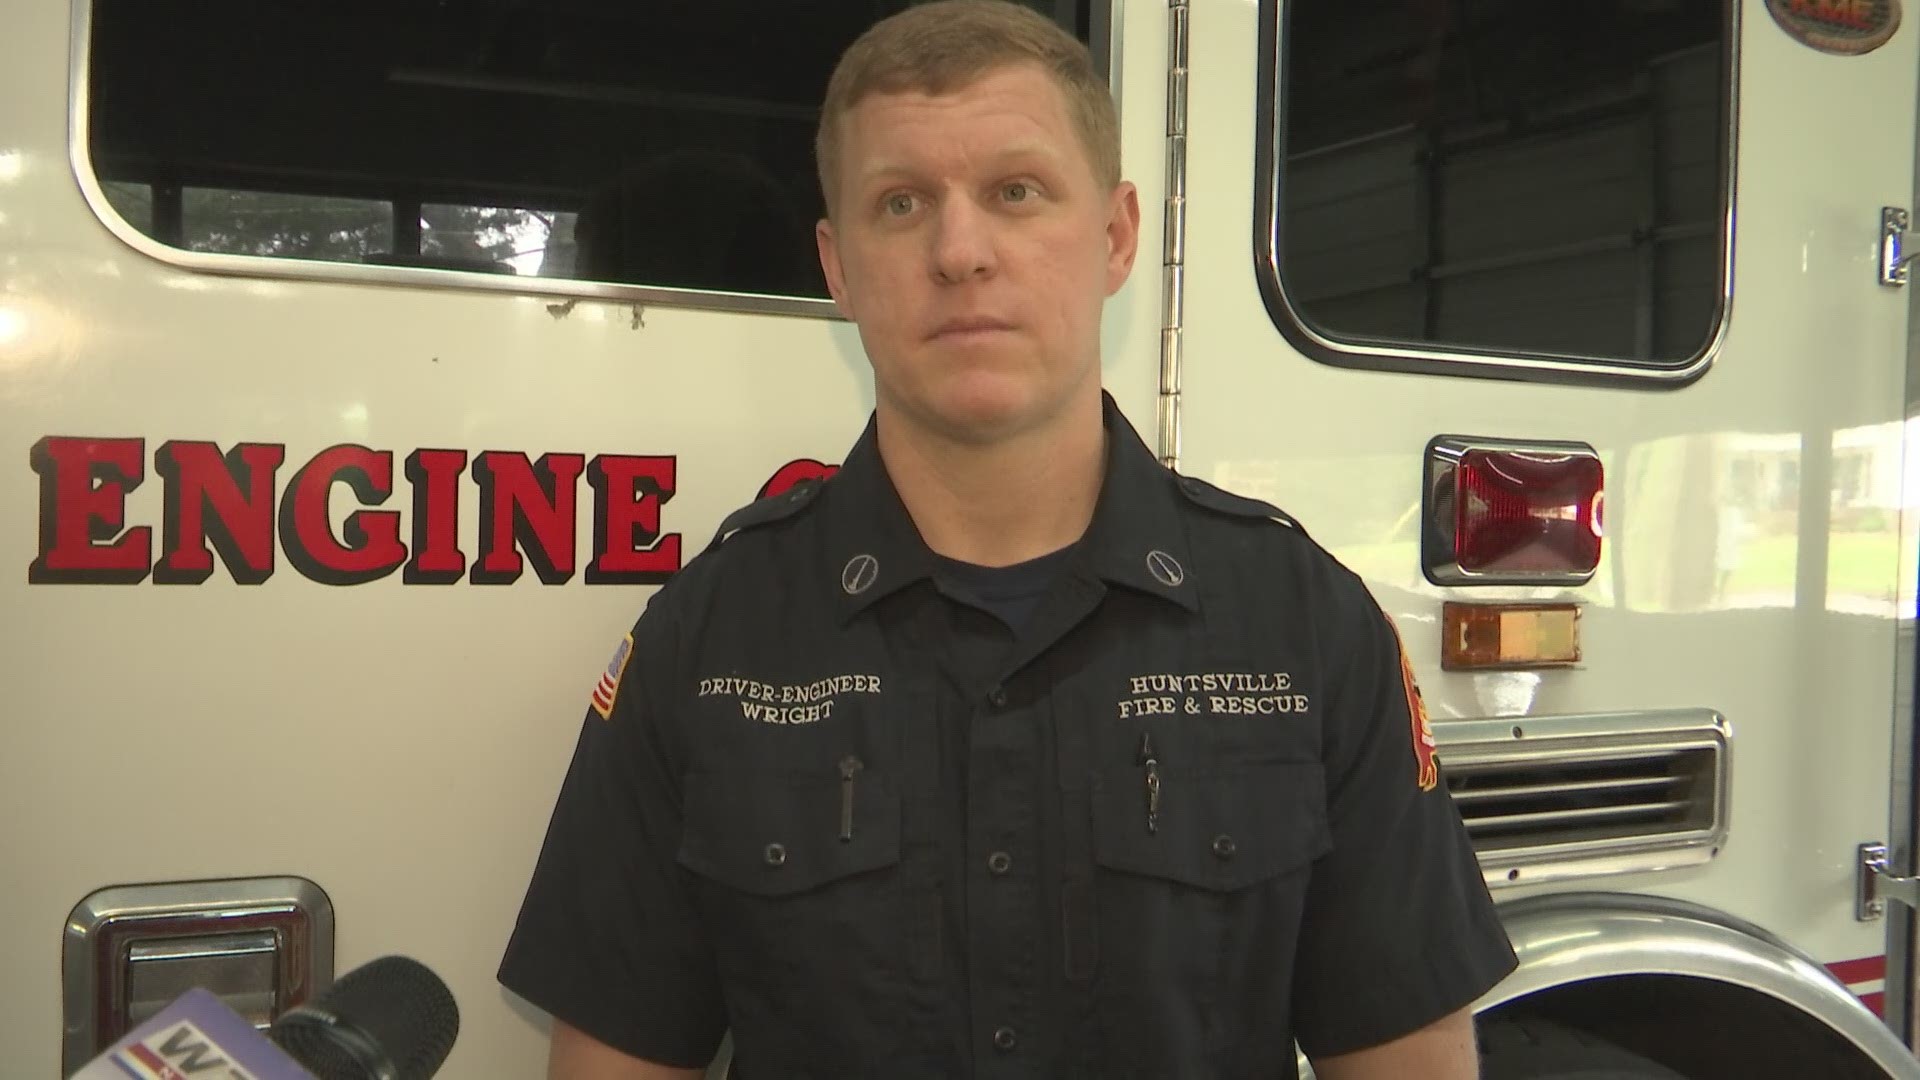 Huntsville Fire & Rescue shares what it's been like for them during the pandemic.